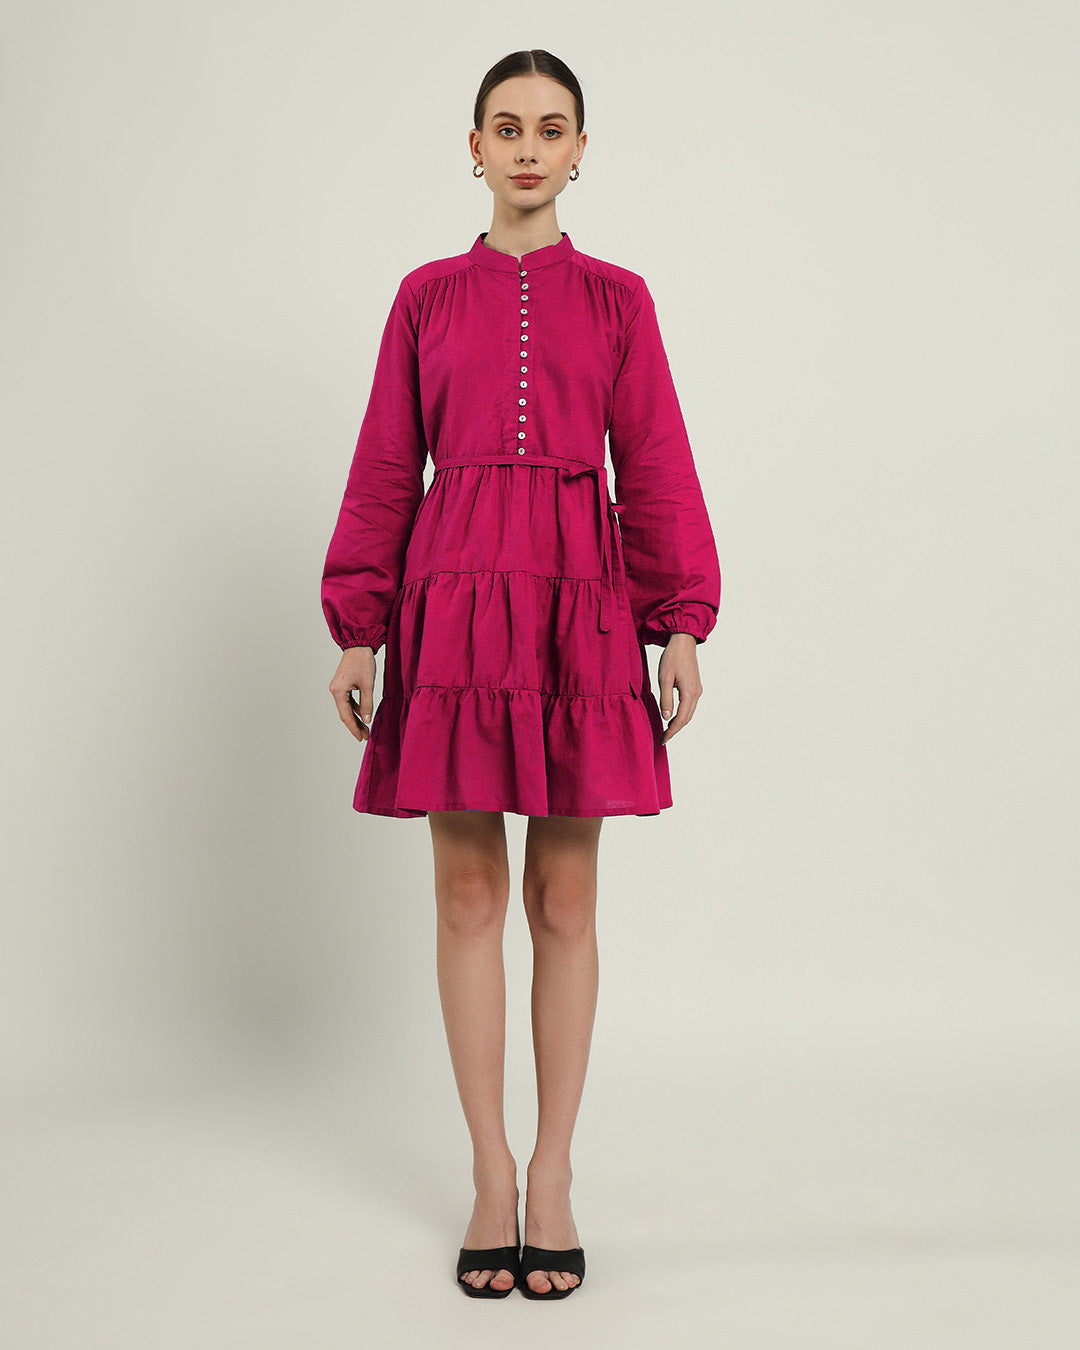 The Ely Berry Dress